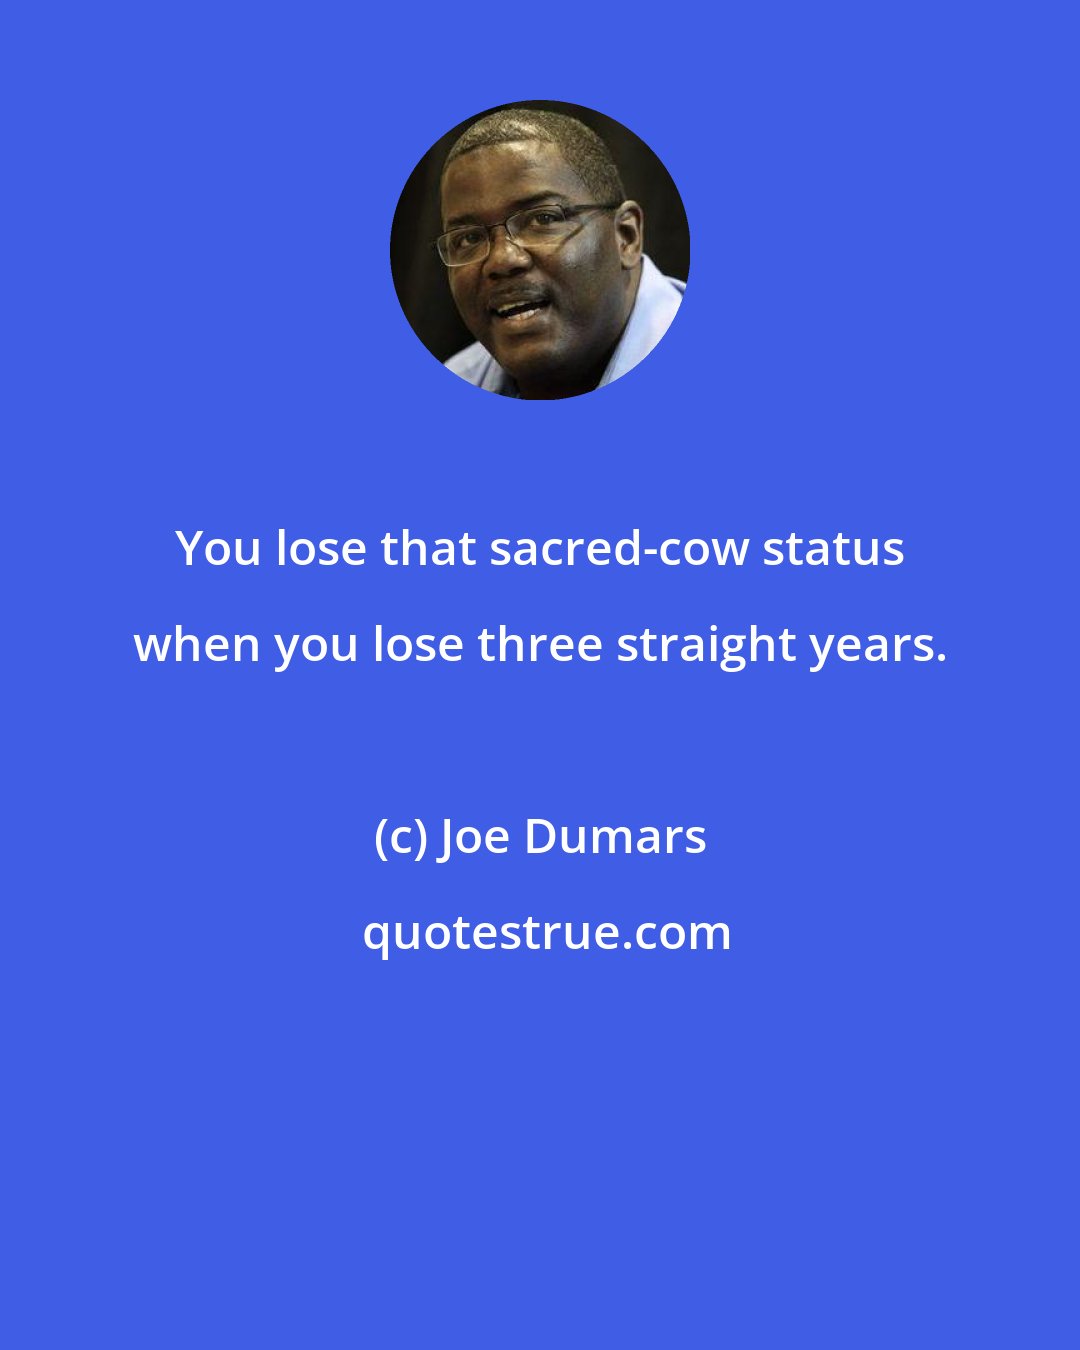 Joe Dumars: You lose that sacred-cow status when you lose three straight years.